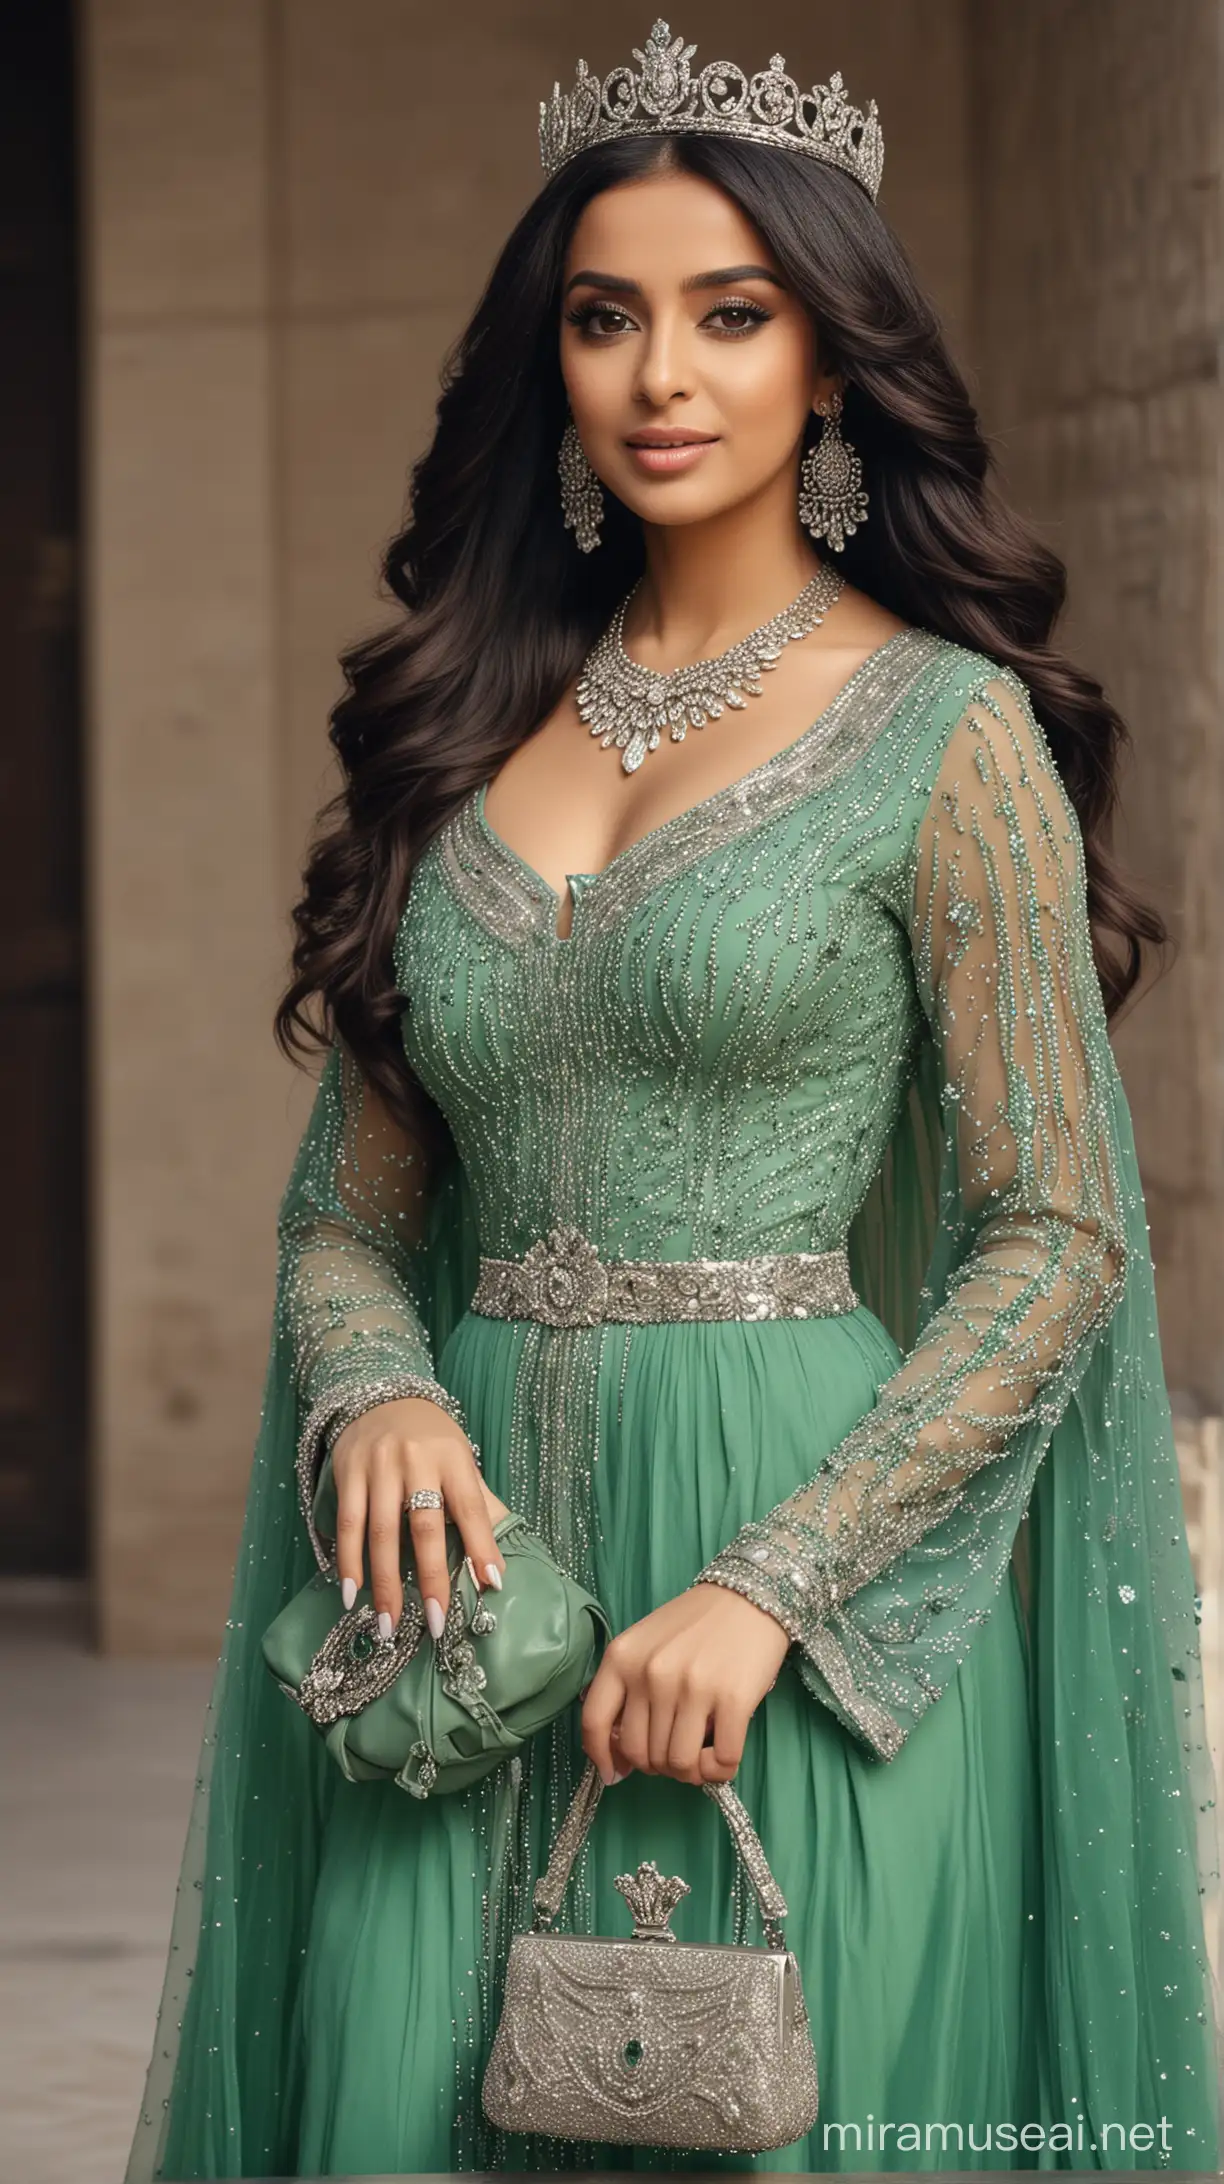 Balqees queen wearing green dress, and a silver hand bag, wearing silver crown, silver accessories.
the hair is black, very long, and straight.
